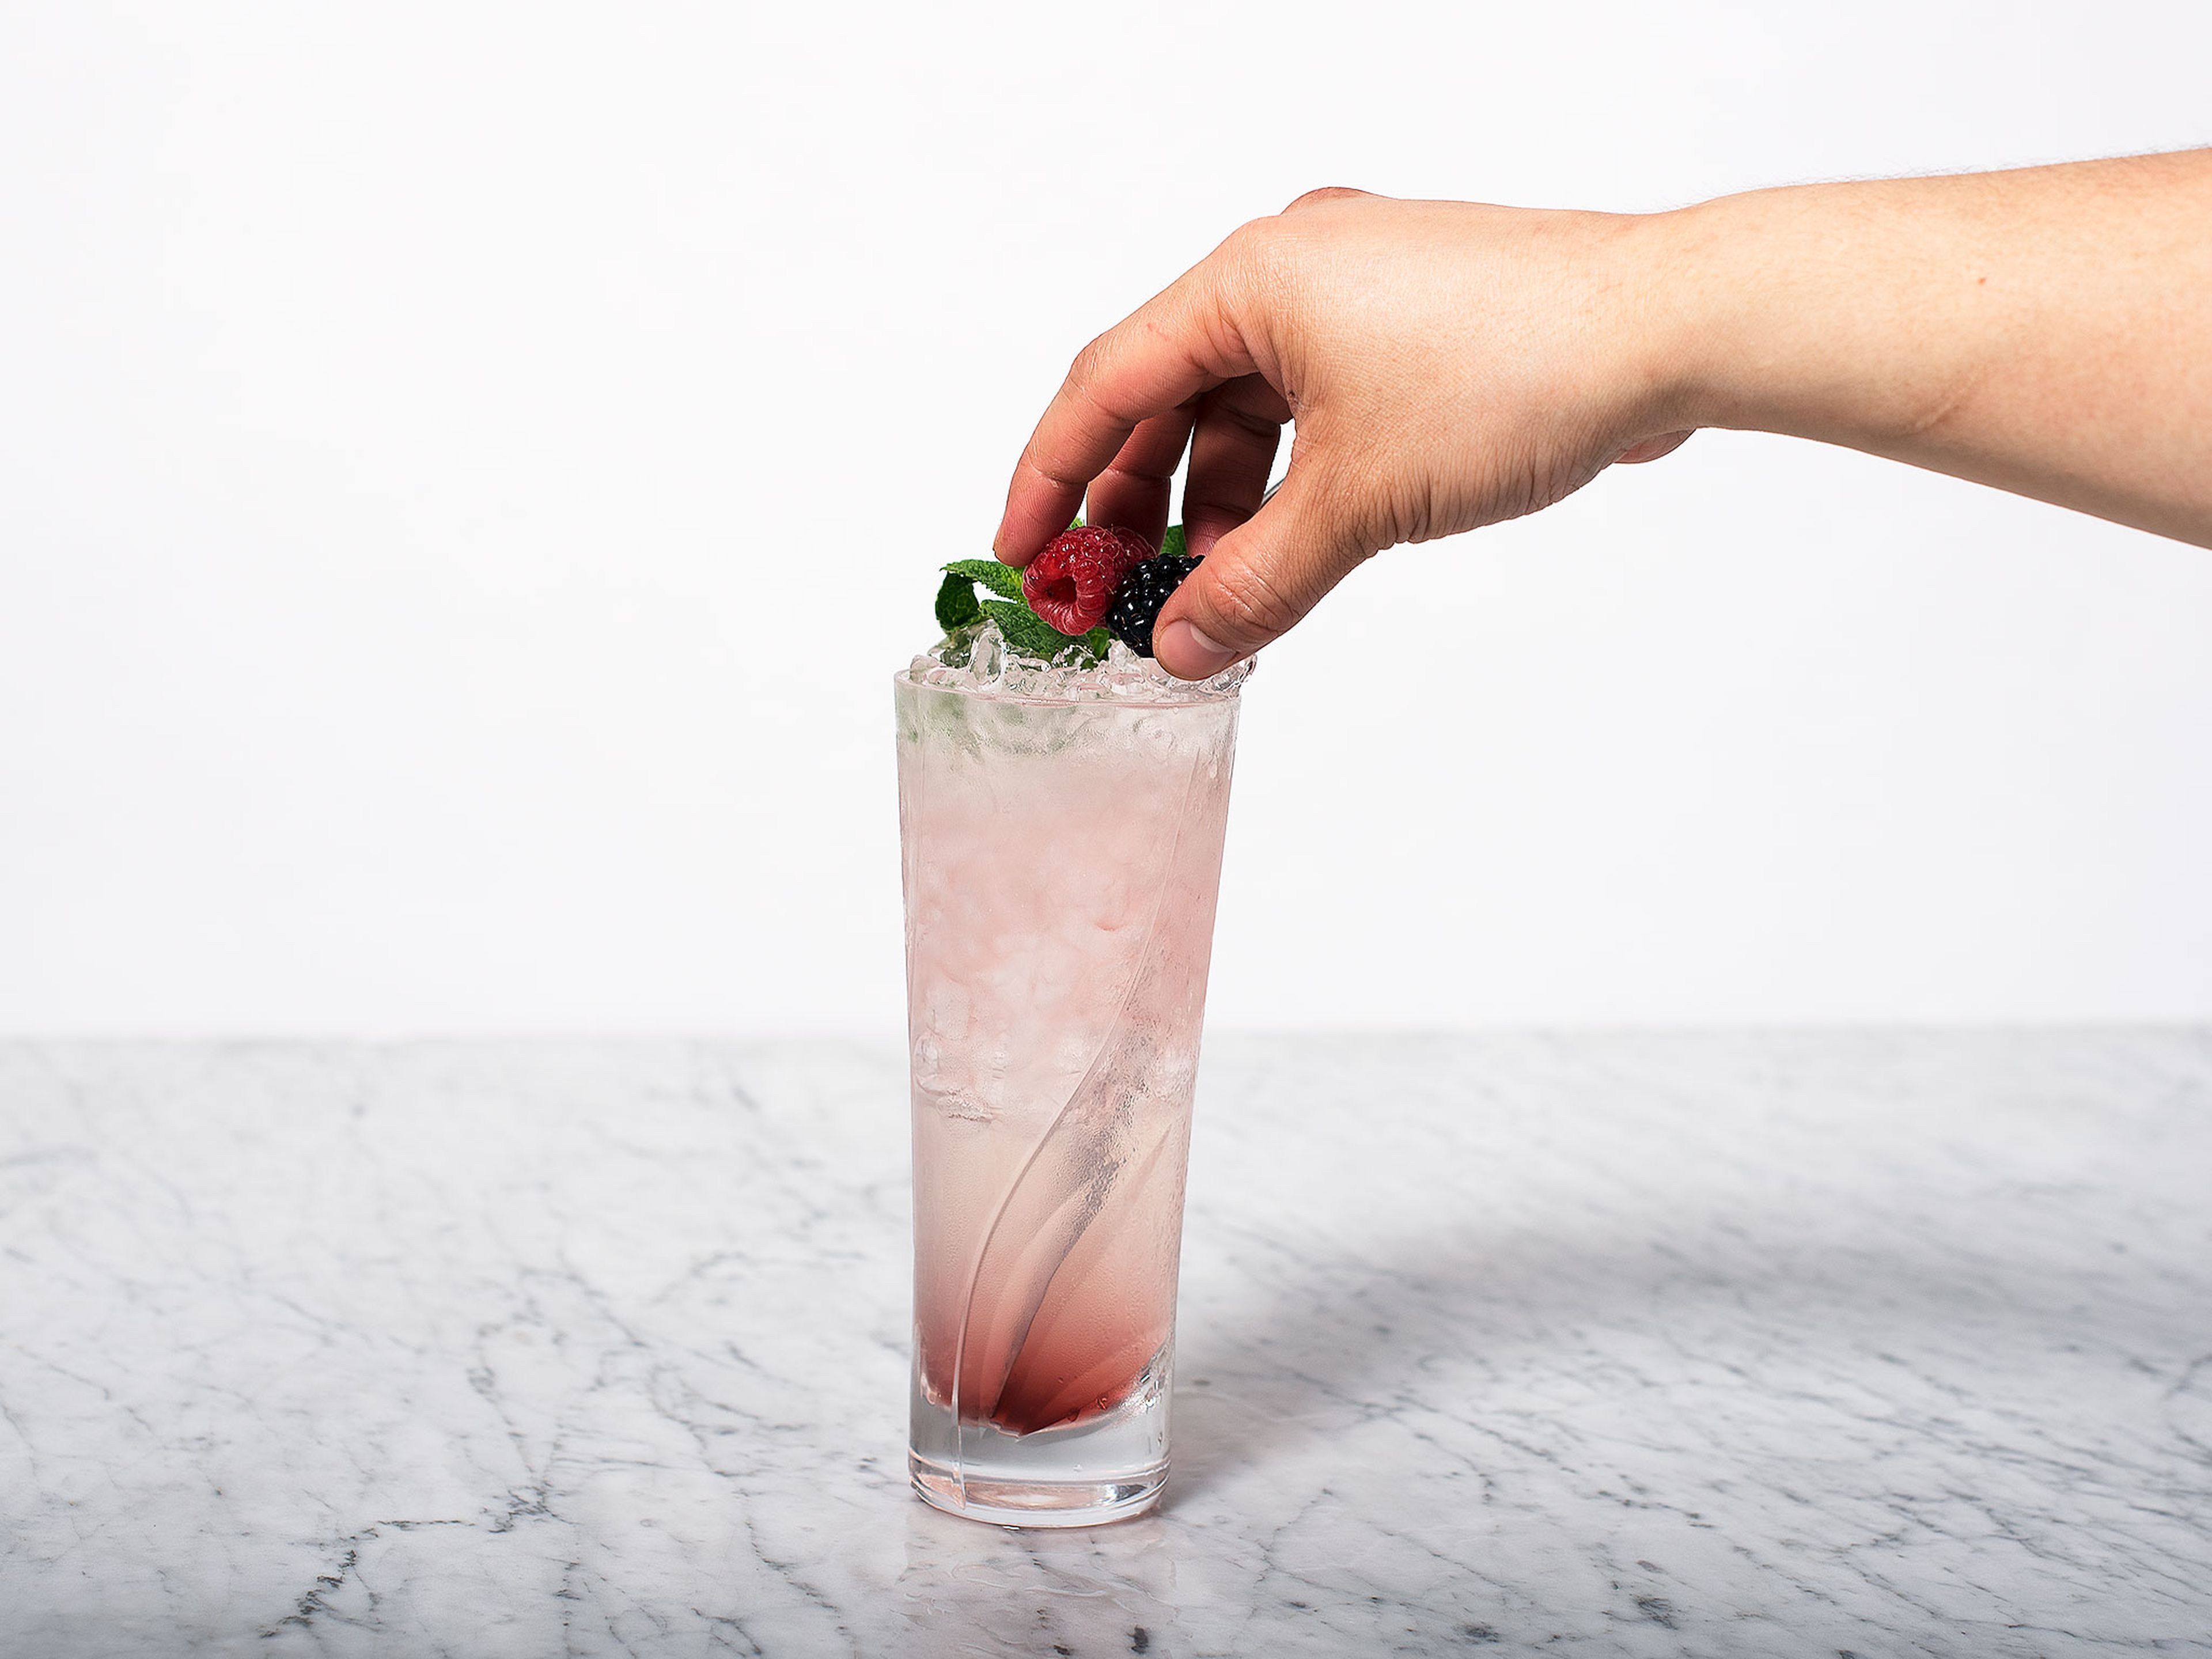 Garnish with mint and berries. Serve with a straw and enjoy!